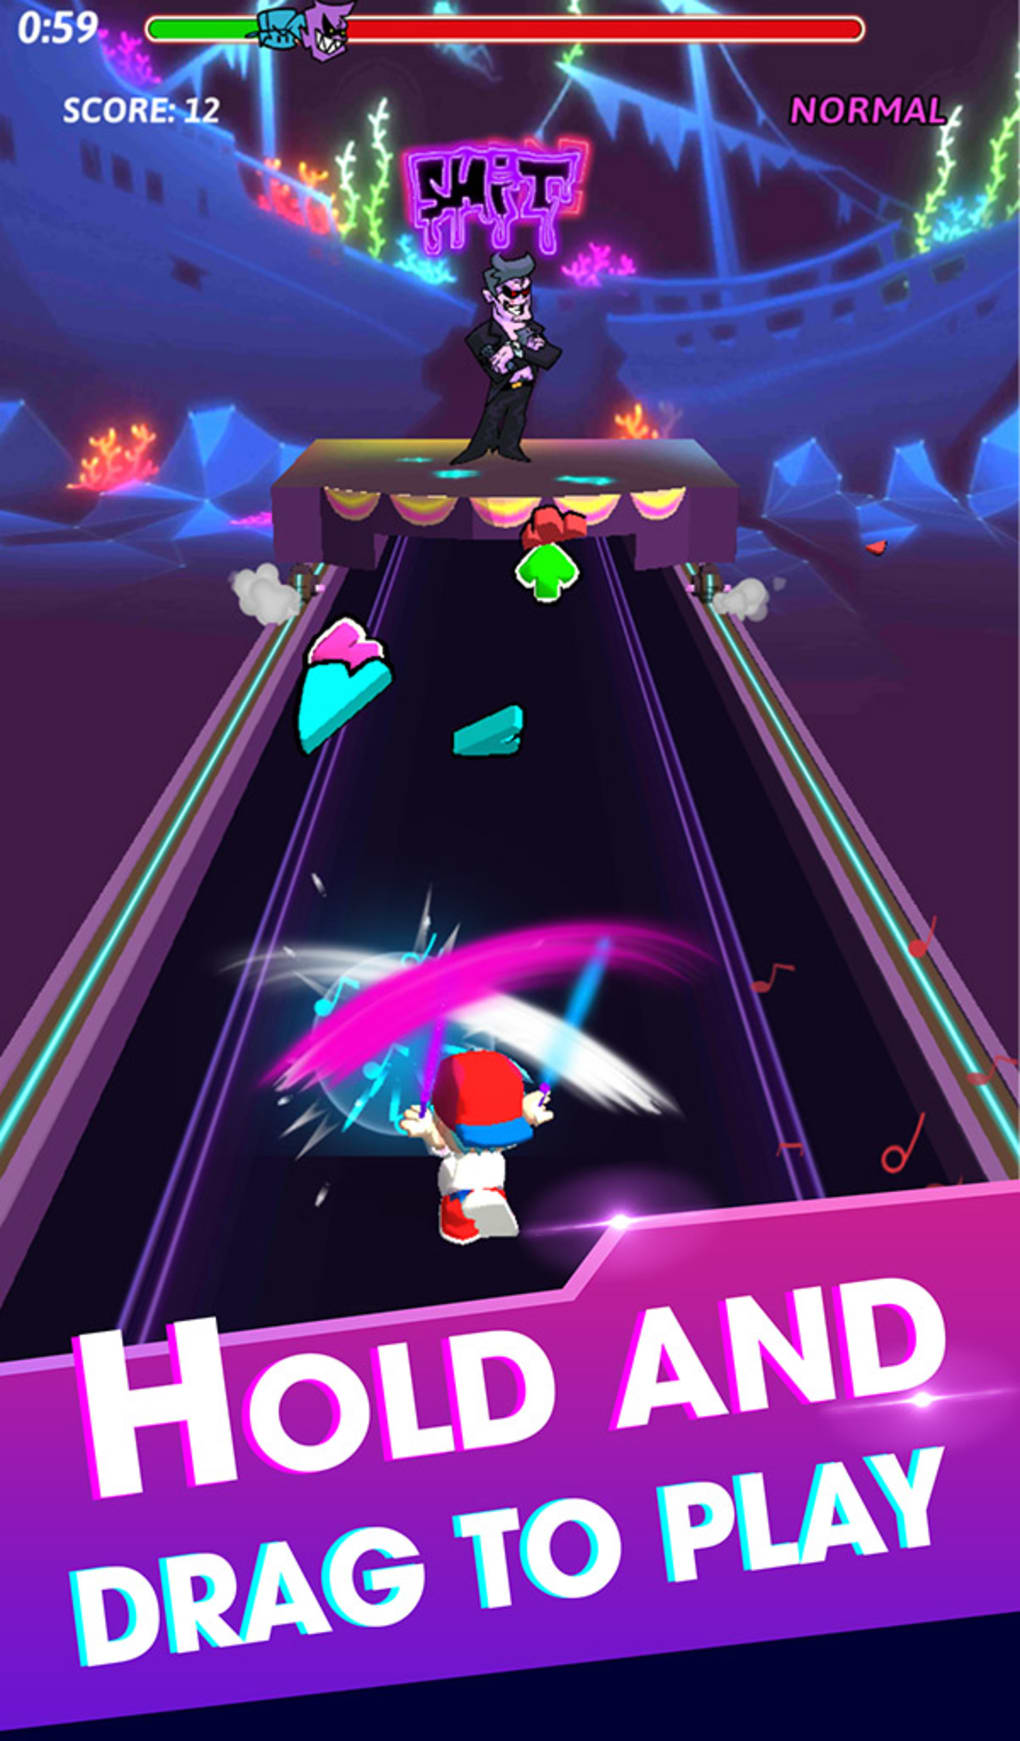 fnf for friday night funkin music gamer beta APK for Android Download